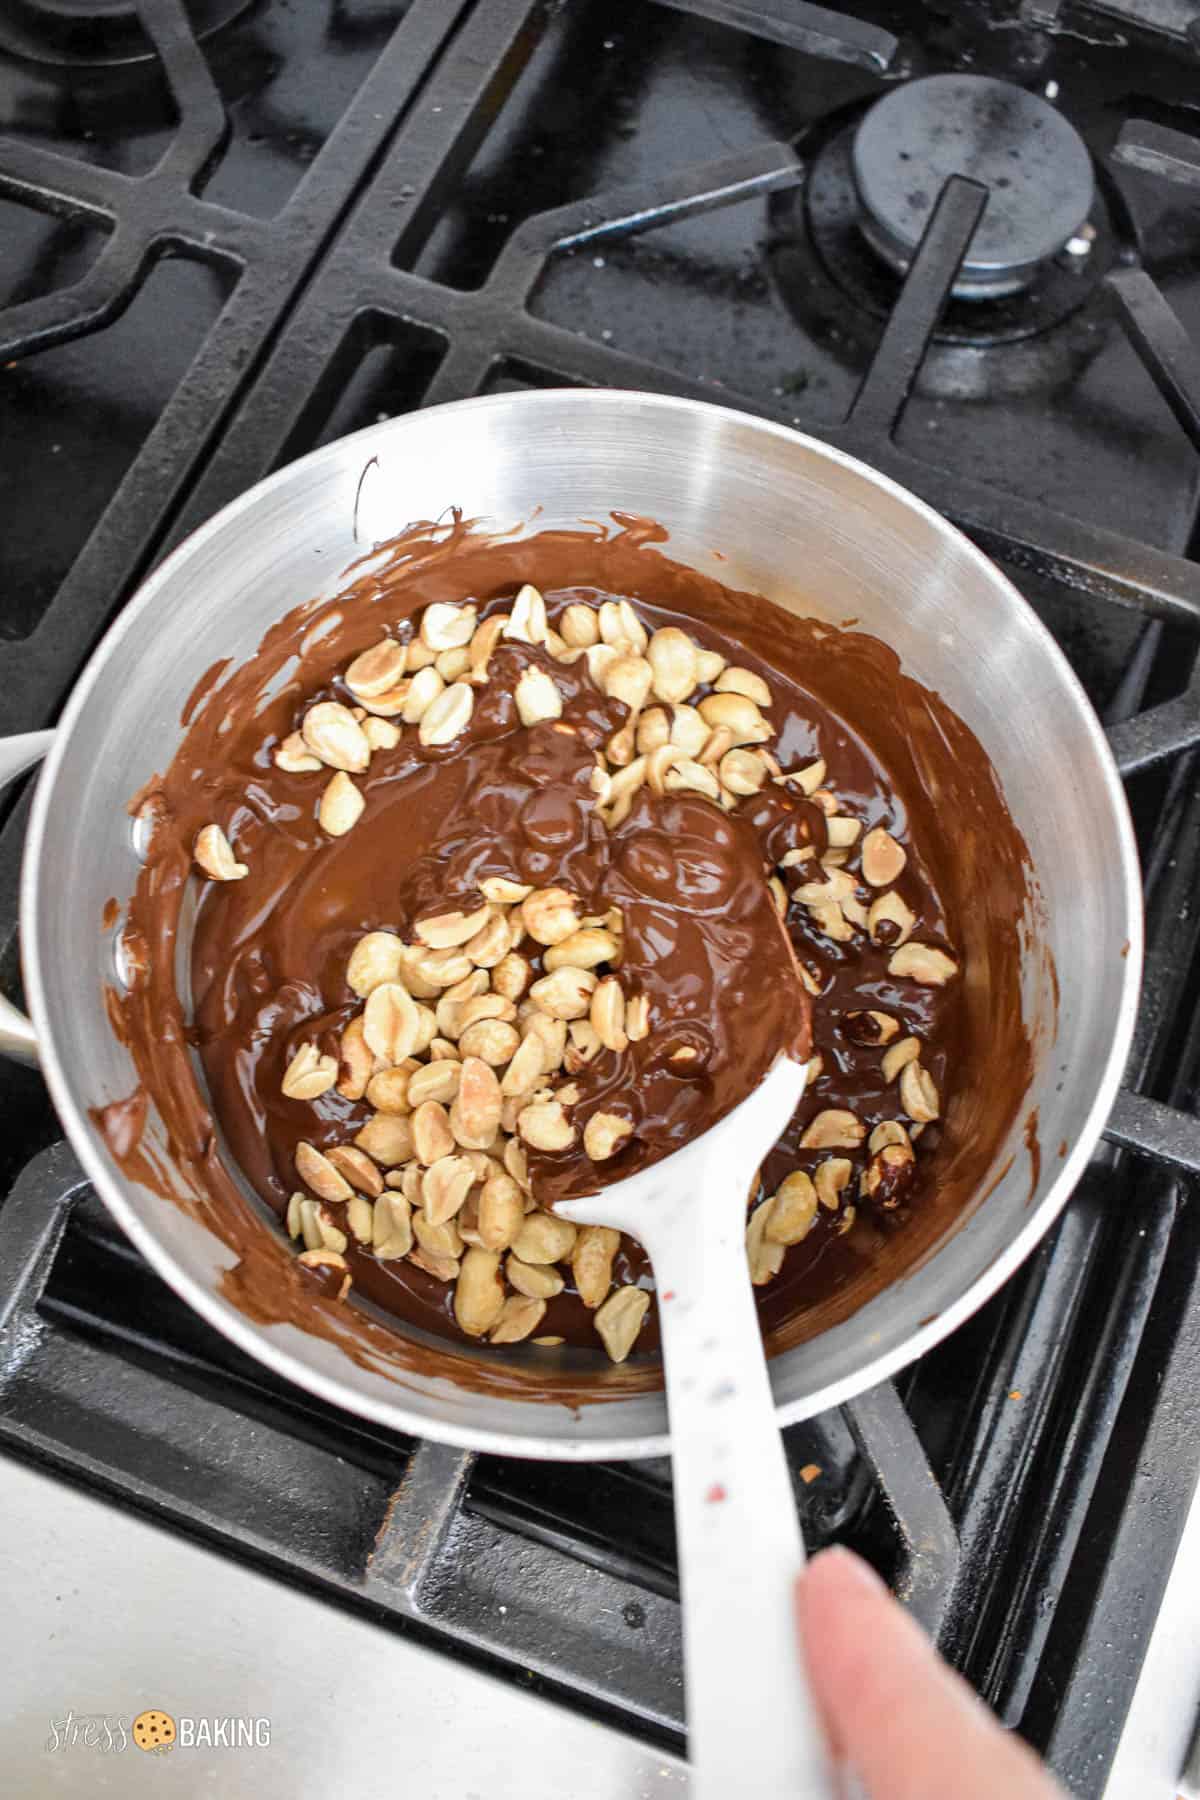 Peanuts being stirred into melted chocolate in a saucepan